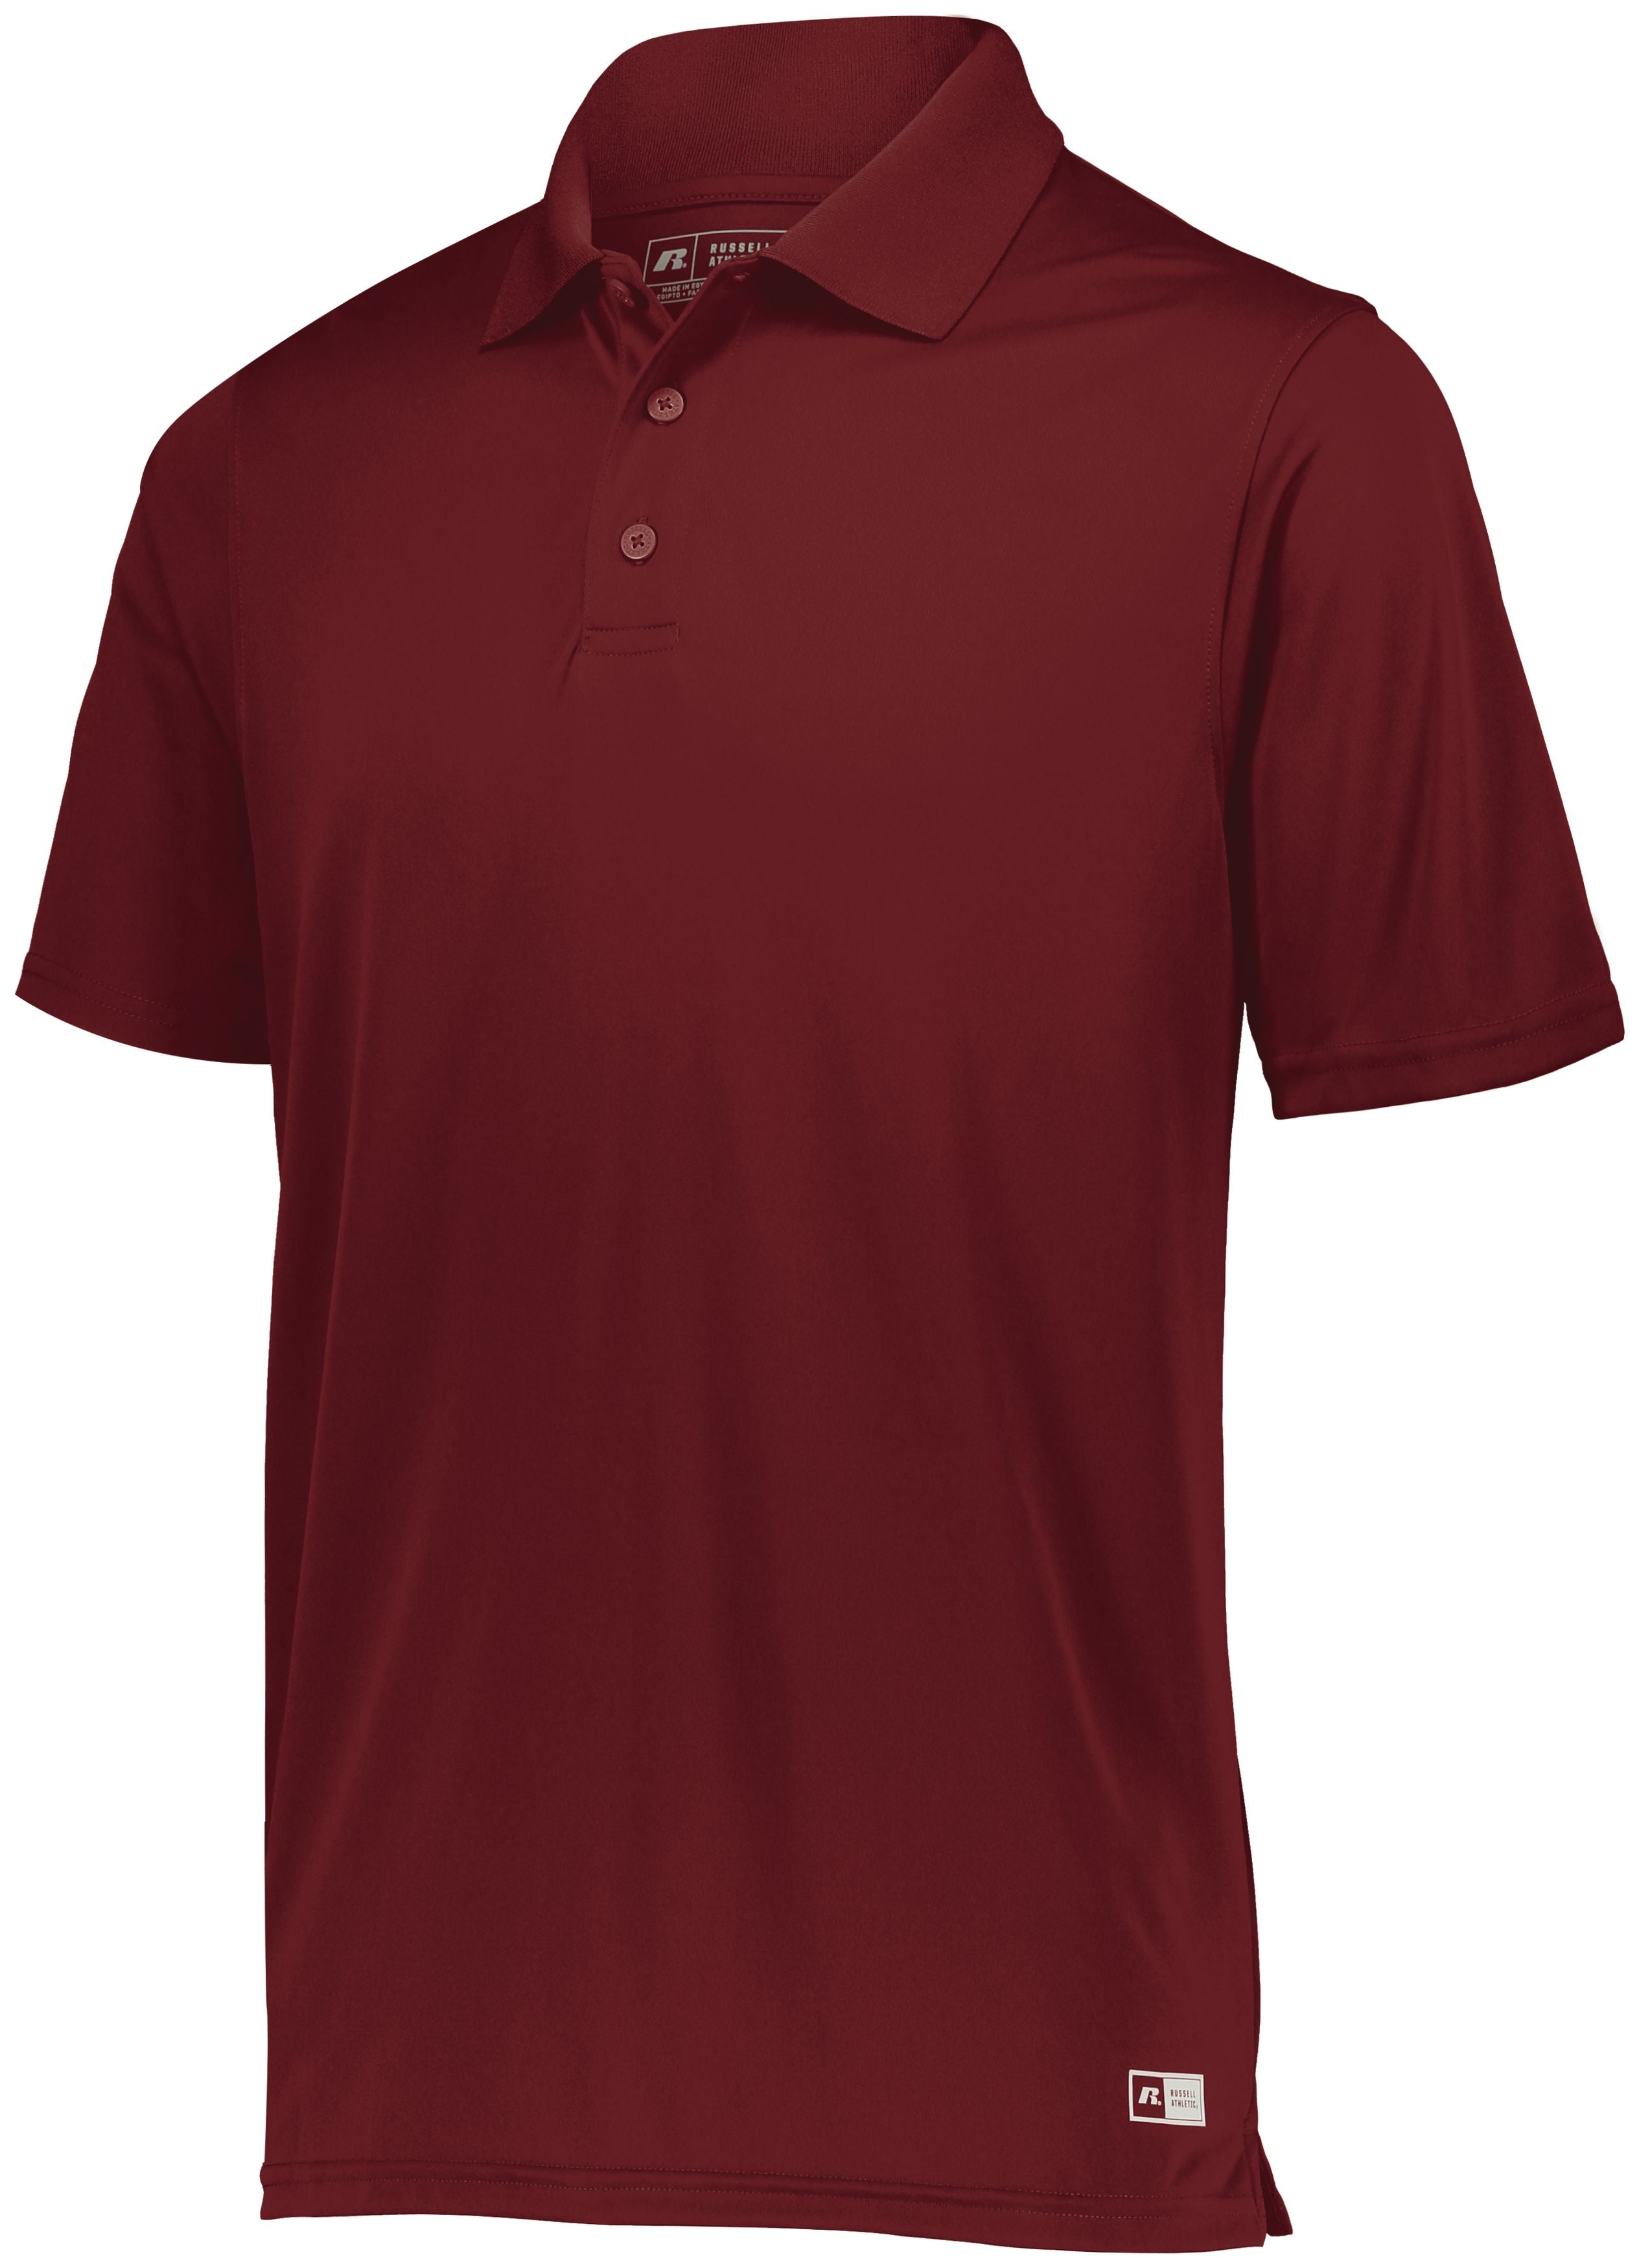 Russell Athletic Essential Polo in Cardinal  -Part of the Adult, Adult-Polos, Polos, Russell-Athletic-Products, Shirts, Corporate-Collection product lines at KanaleyCreations.com